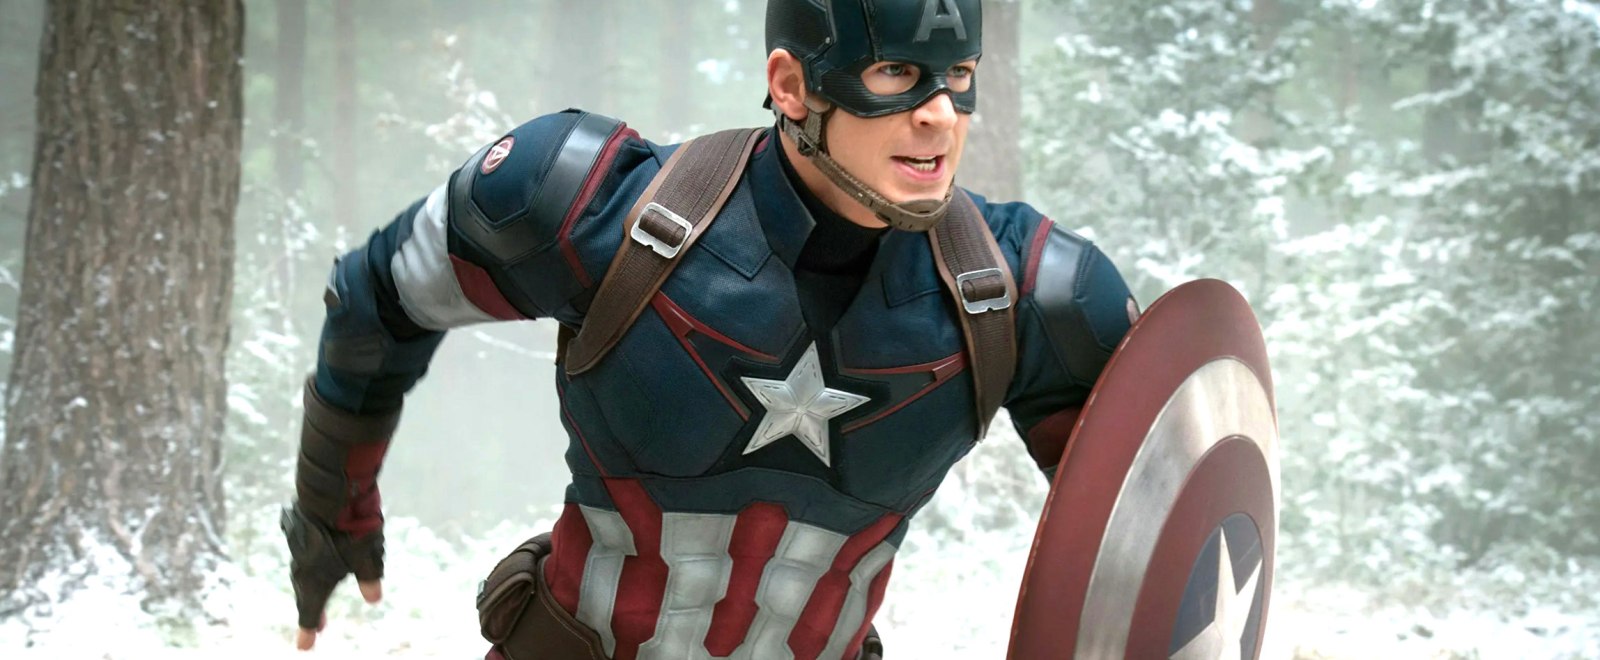 Chris Evans Is Reportedly Considering Returning As Captain America, And Speculation Is Running Wild About What This Means